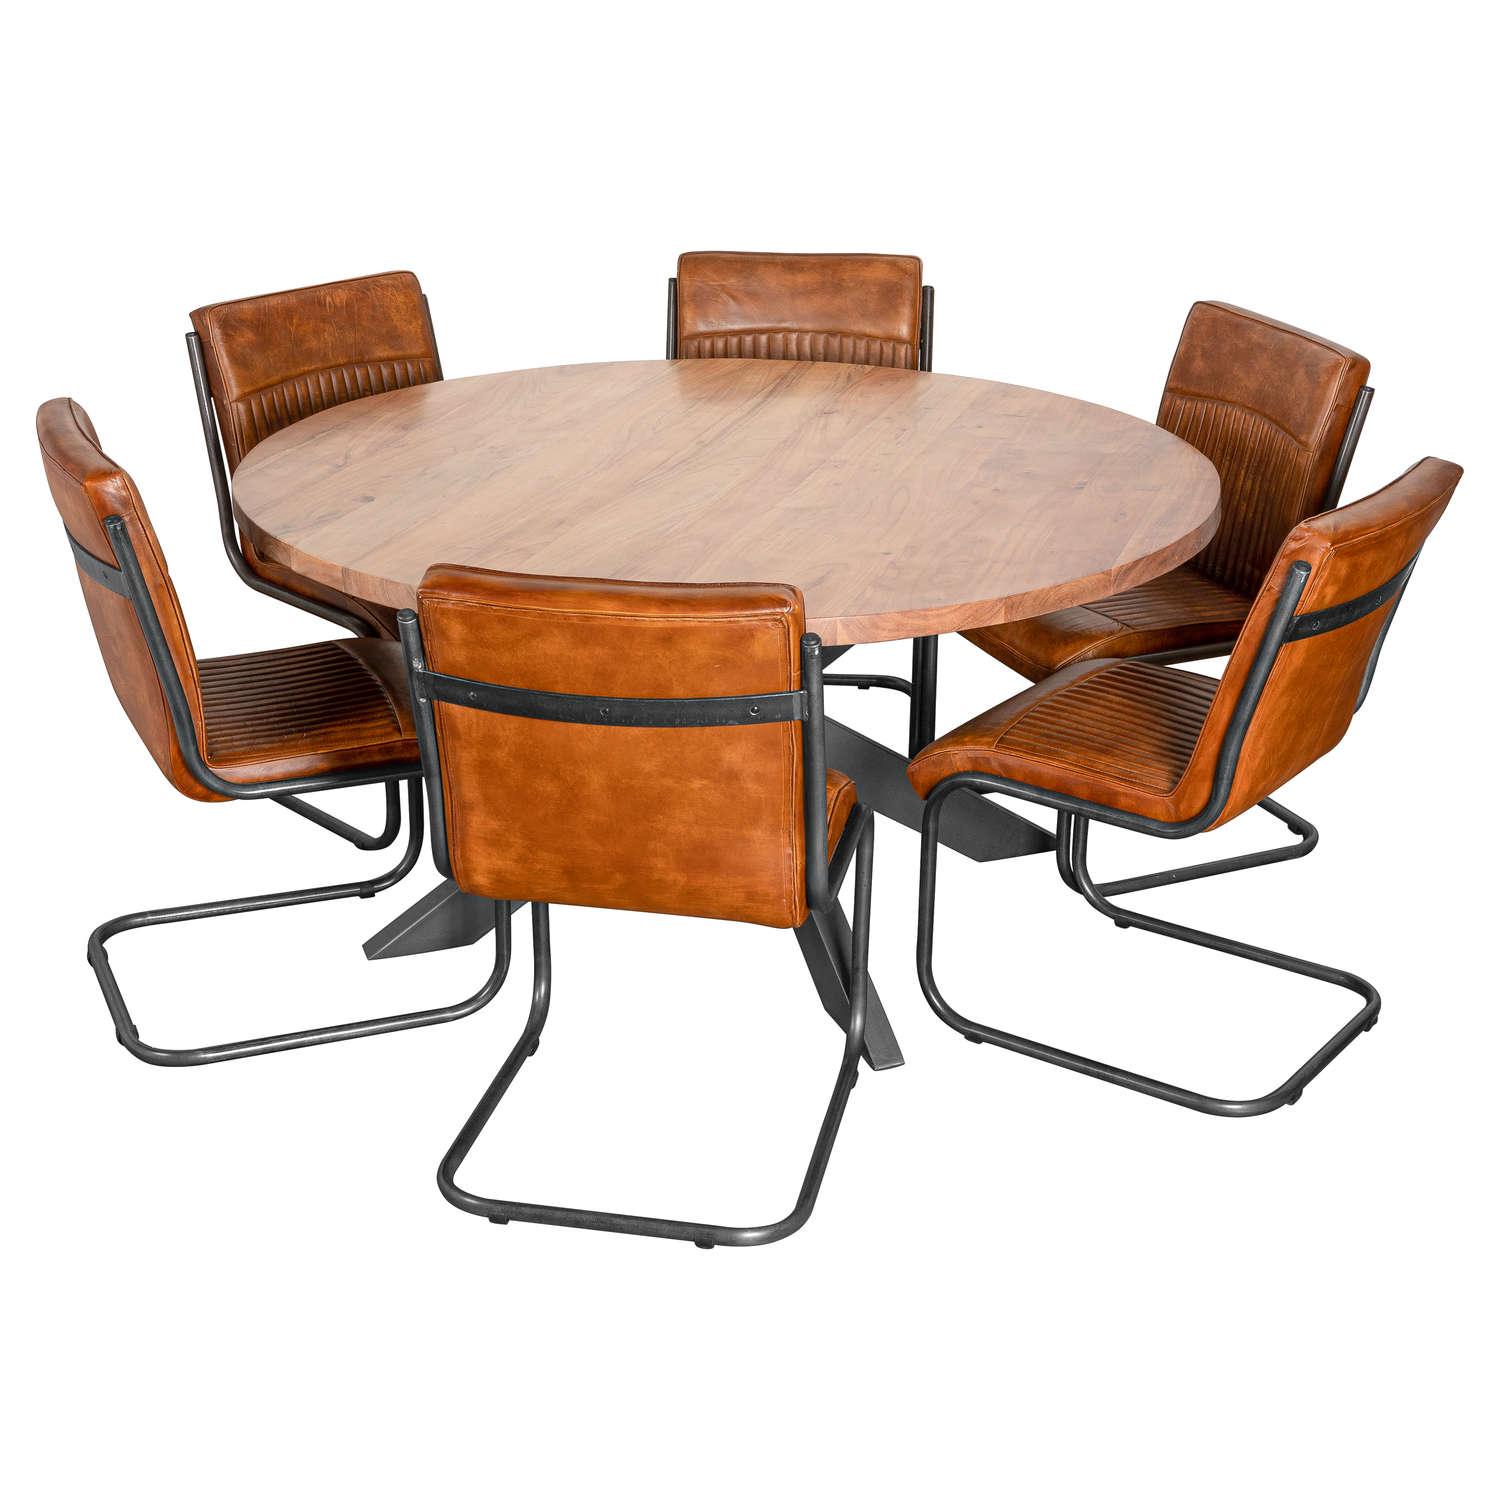 Live Edge Collection Large Round Dining Table - Vookoo Lifestyle